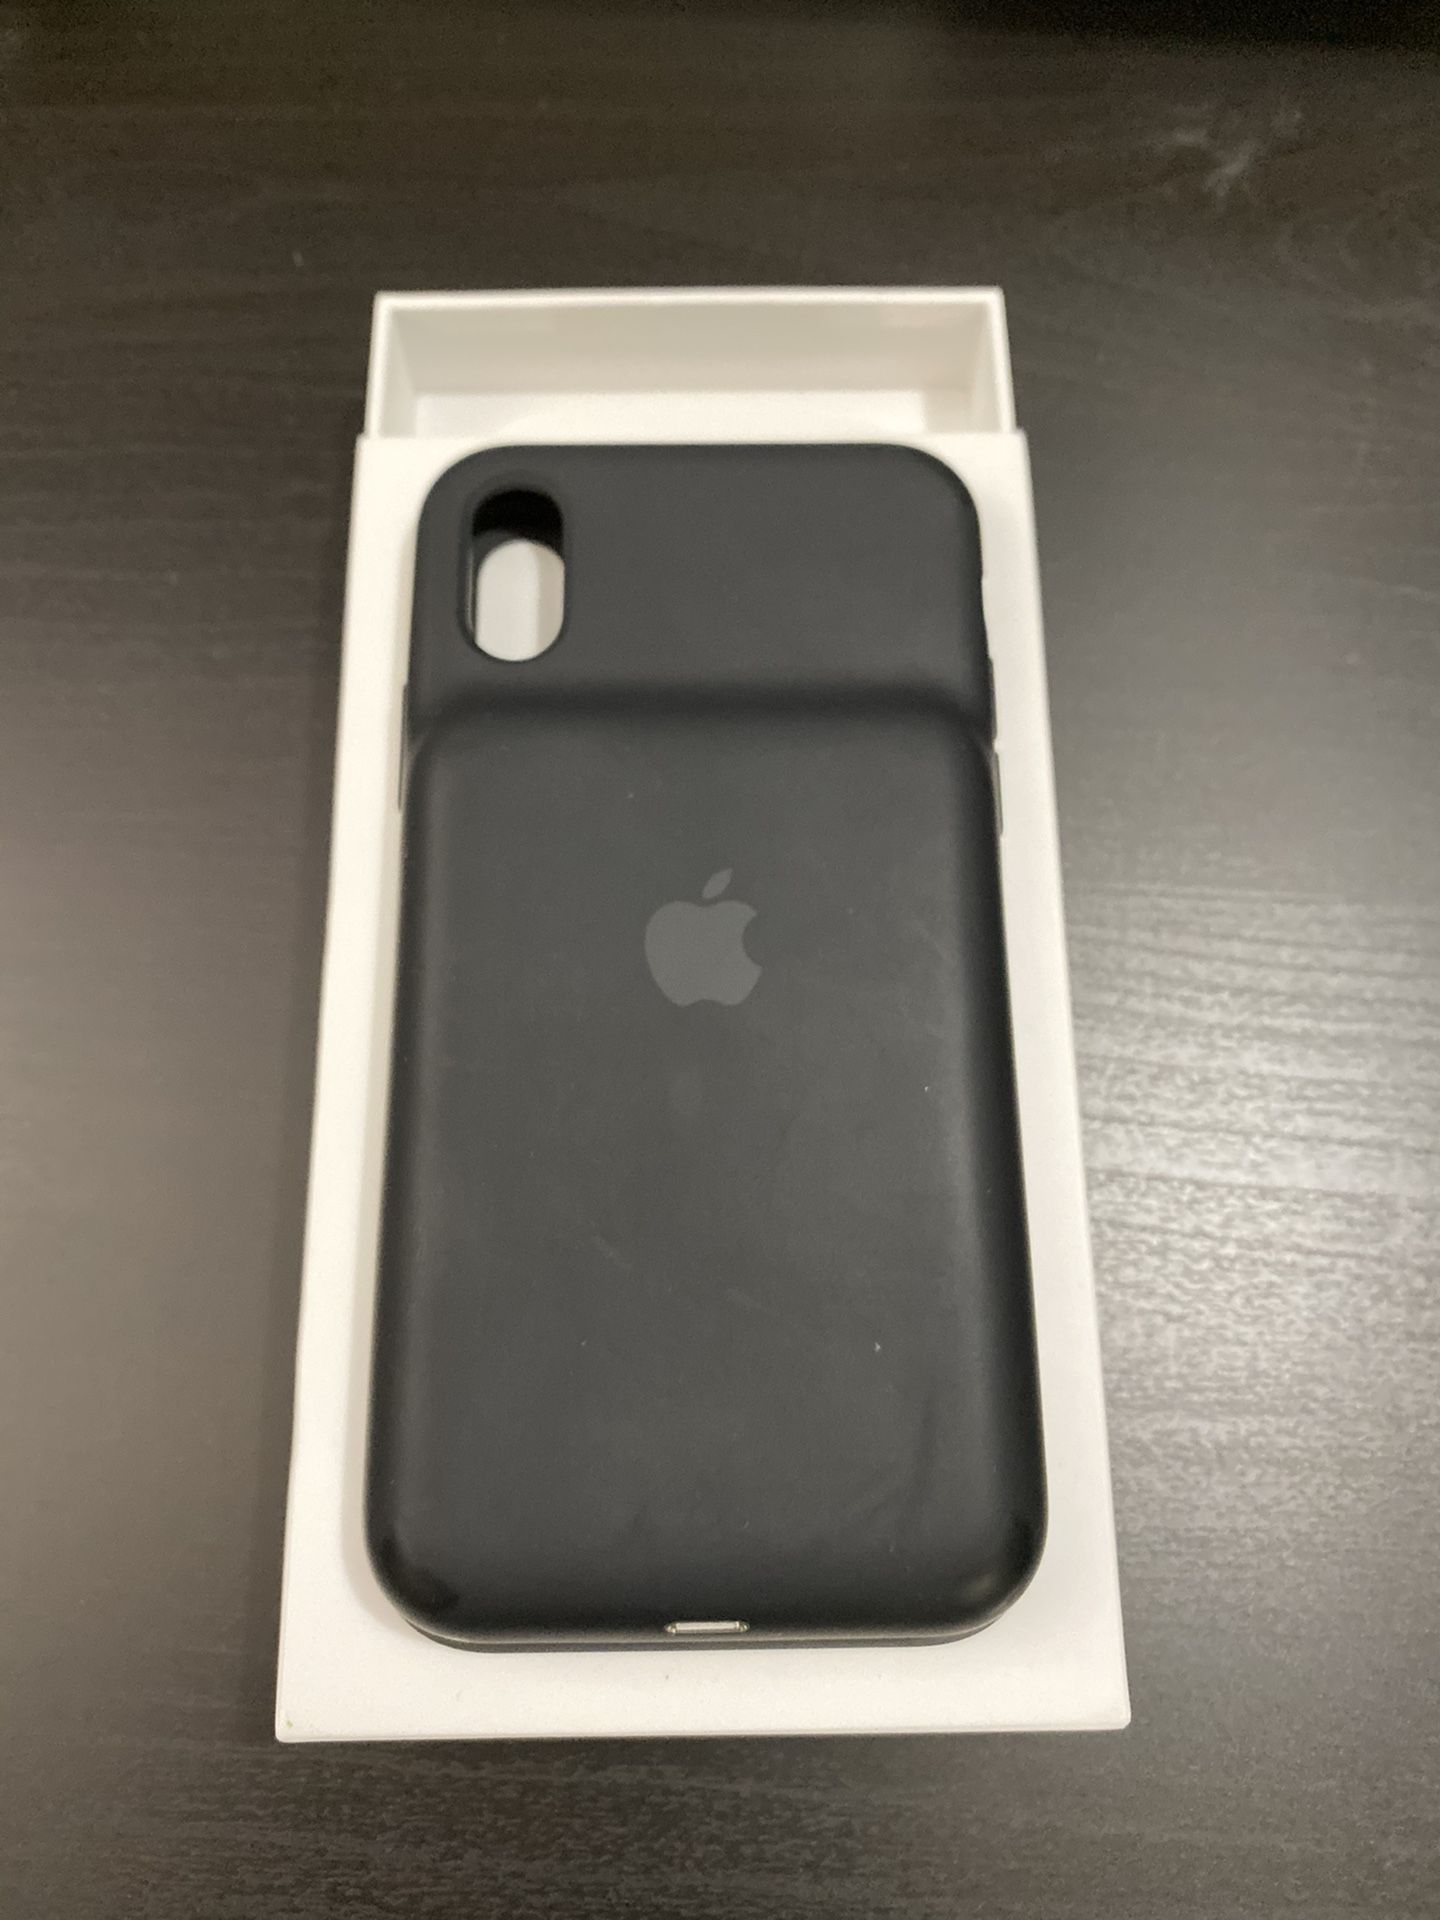 Apple iPhone XS Smart Battery Case OEM in Black in great condition!